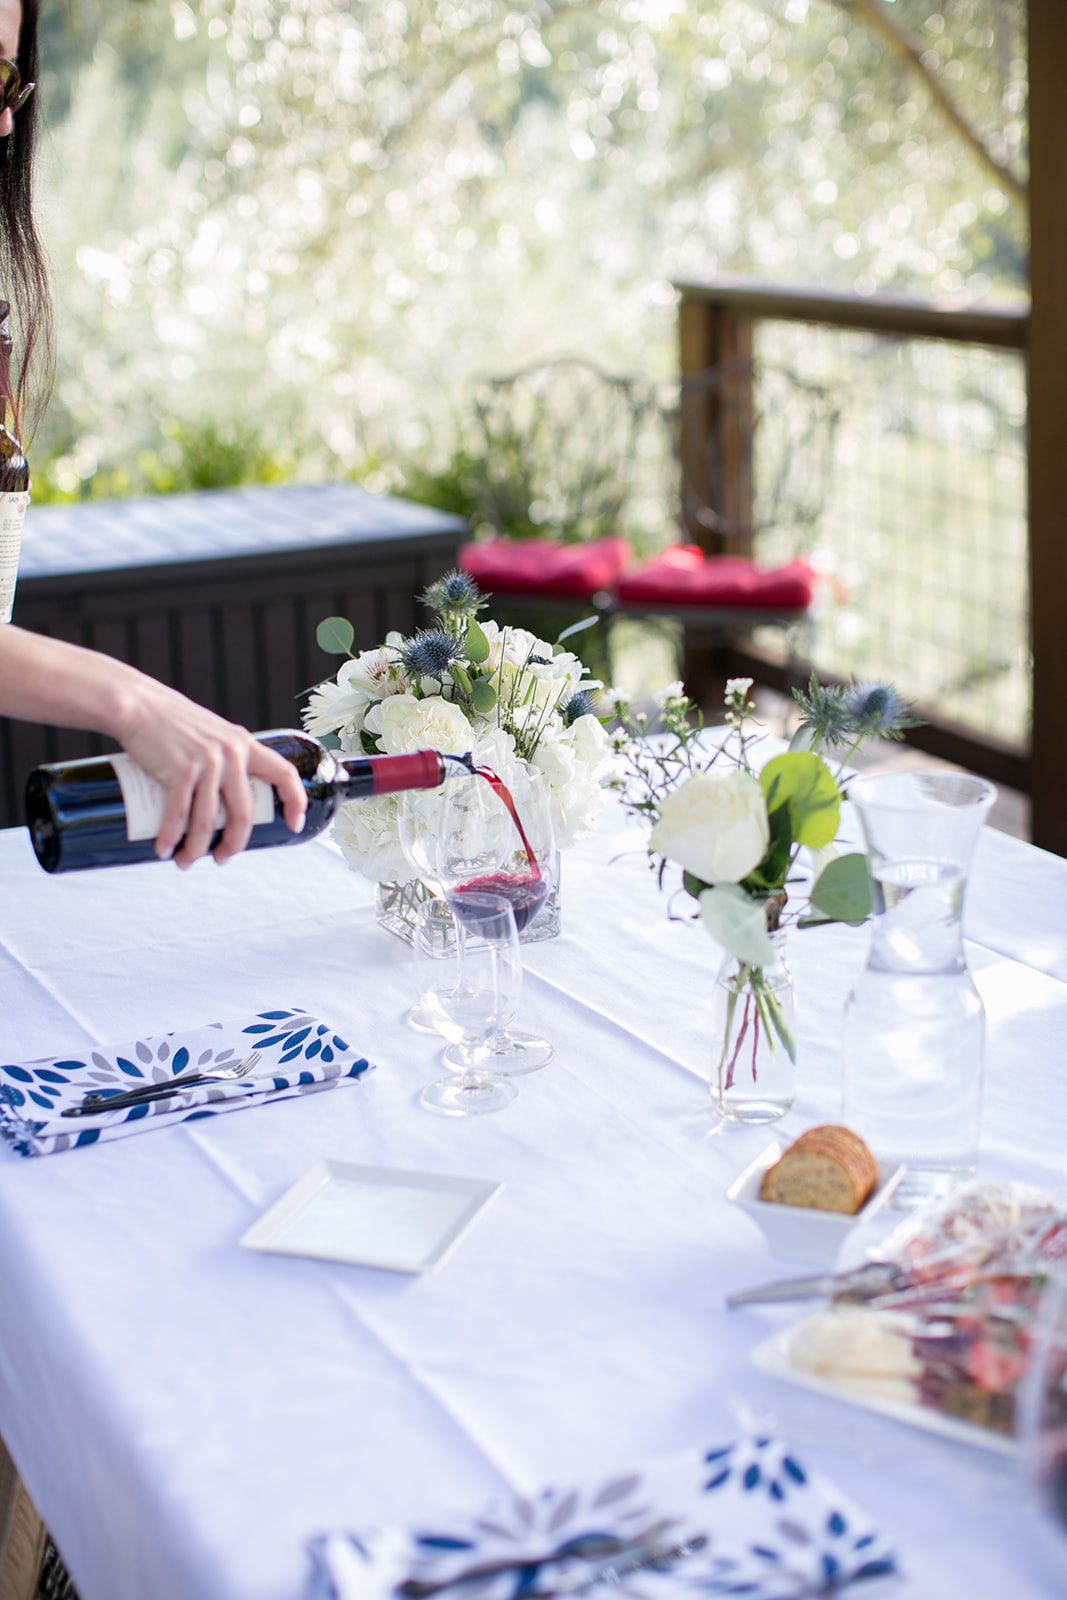 pouring wine at pretty table